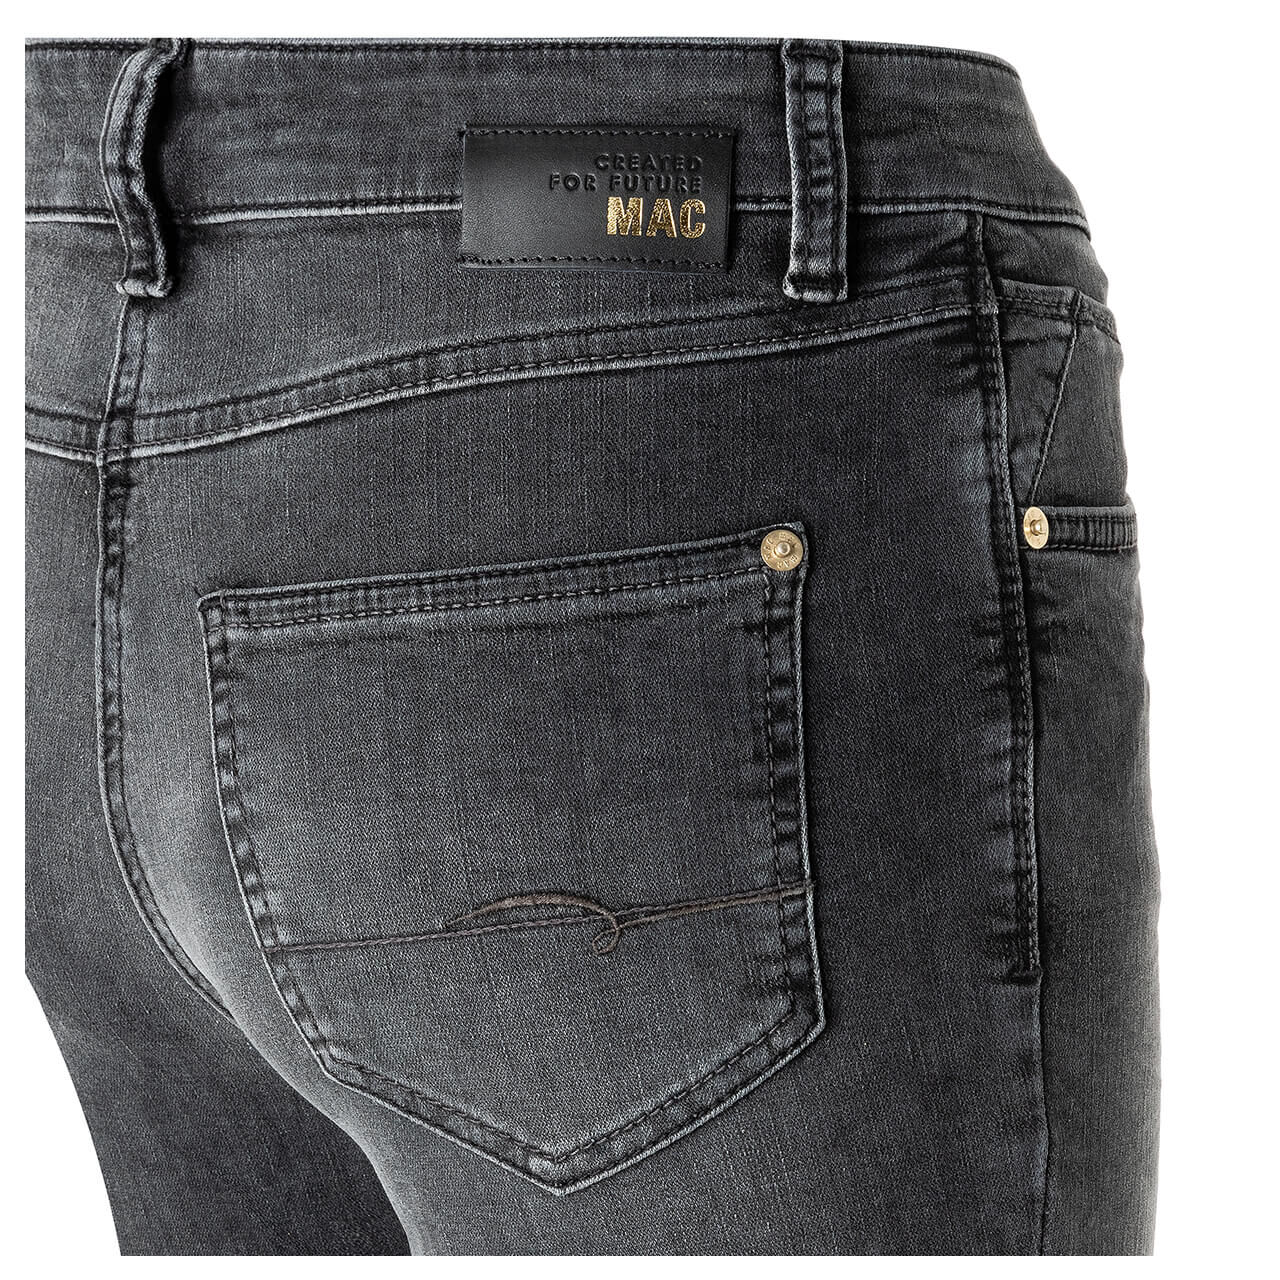 MAC Melanie Jeans fancy anthracite washed